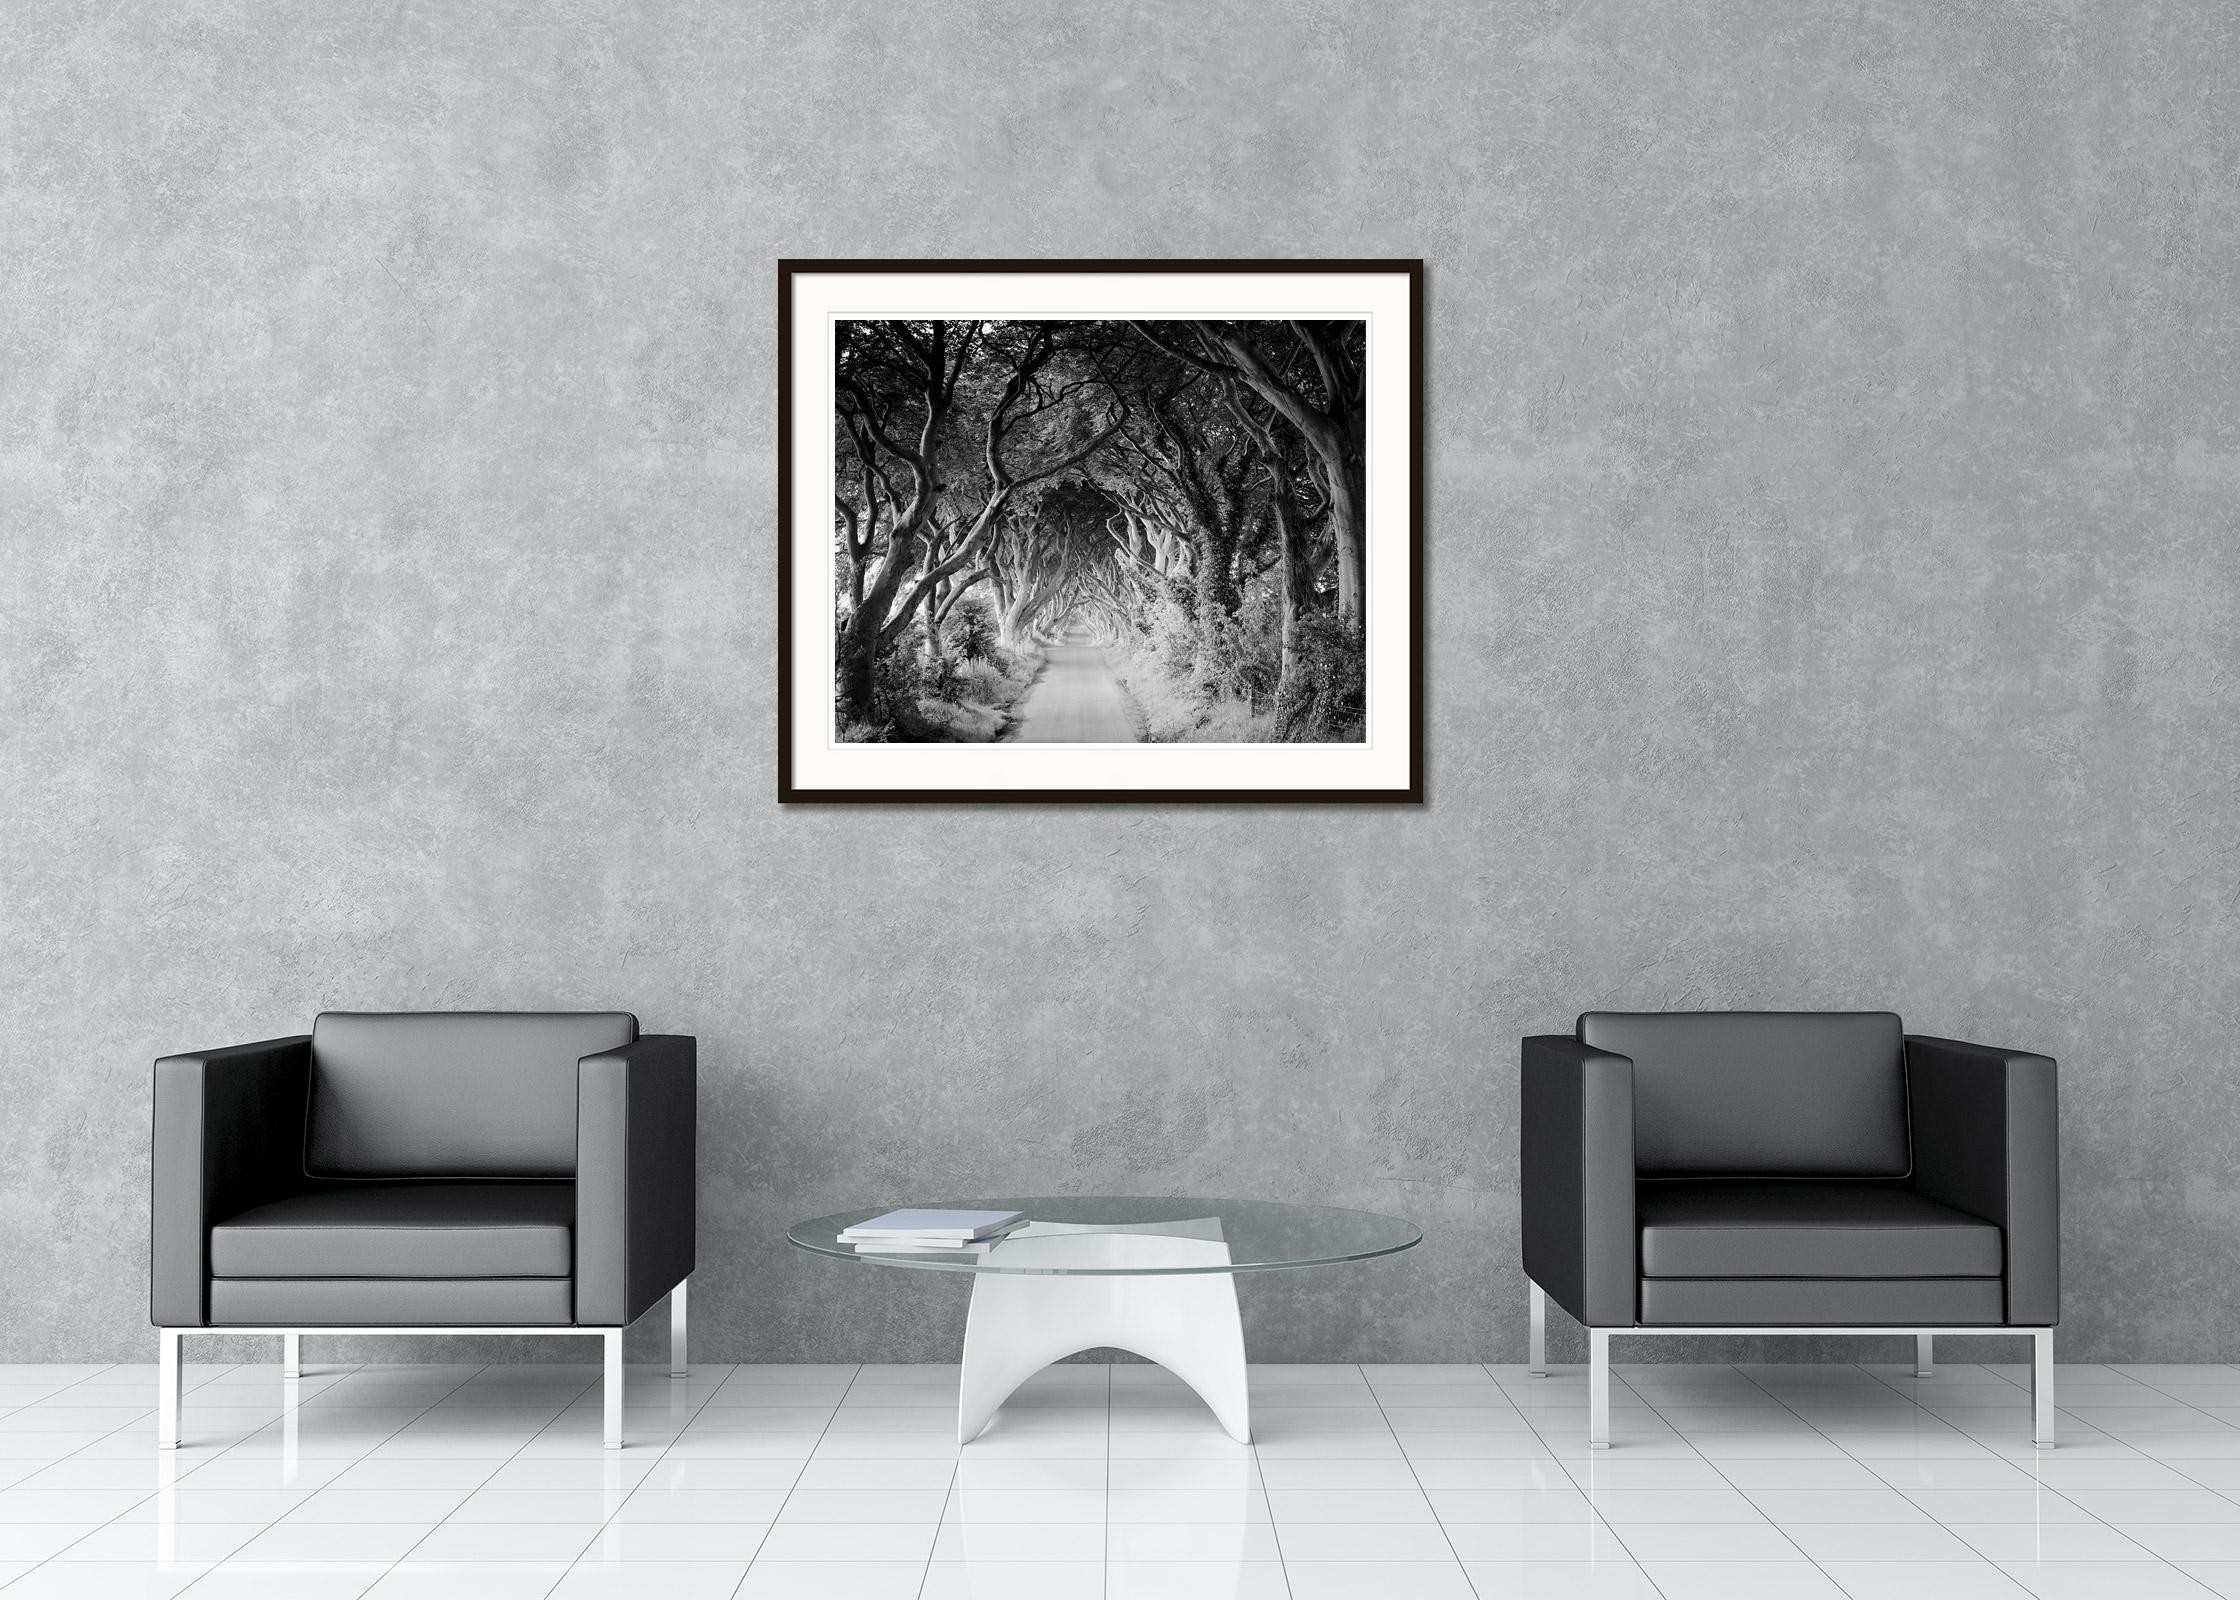 Black and White Fine Art Landscape Photography. The Dark Hedges, unique beech tree avenue in Northern Ireland, film scene from games of thrones. Archival pigment ink print, edition of 10. Signed, titled, dated and numbered by artist. Certificate of